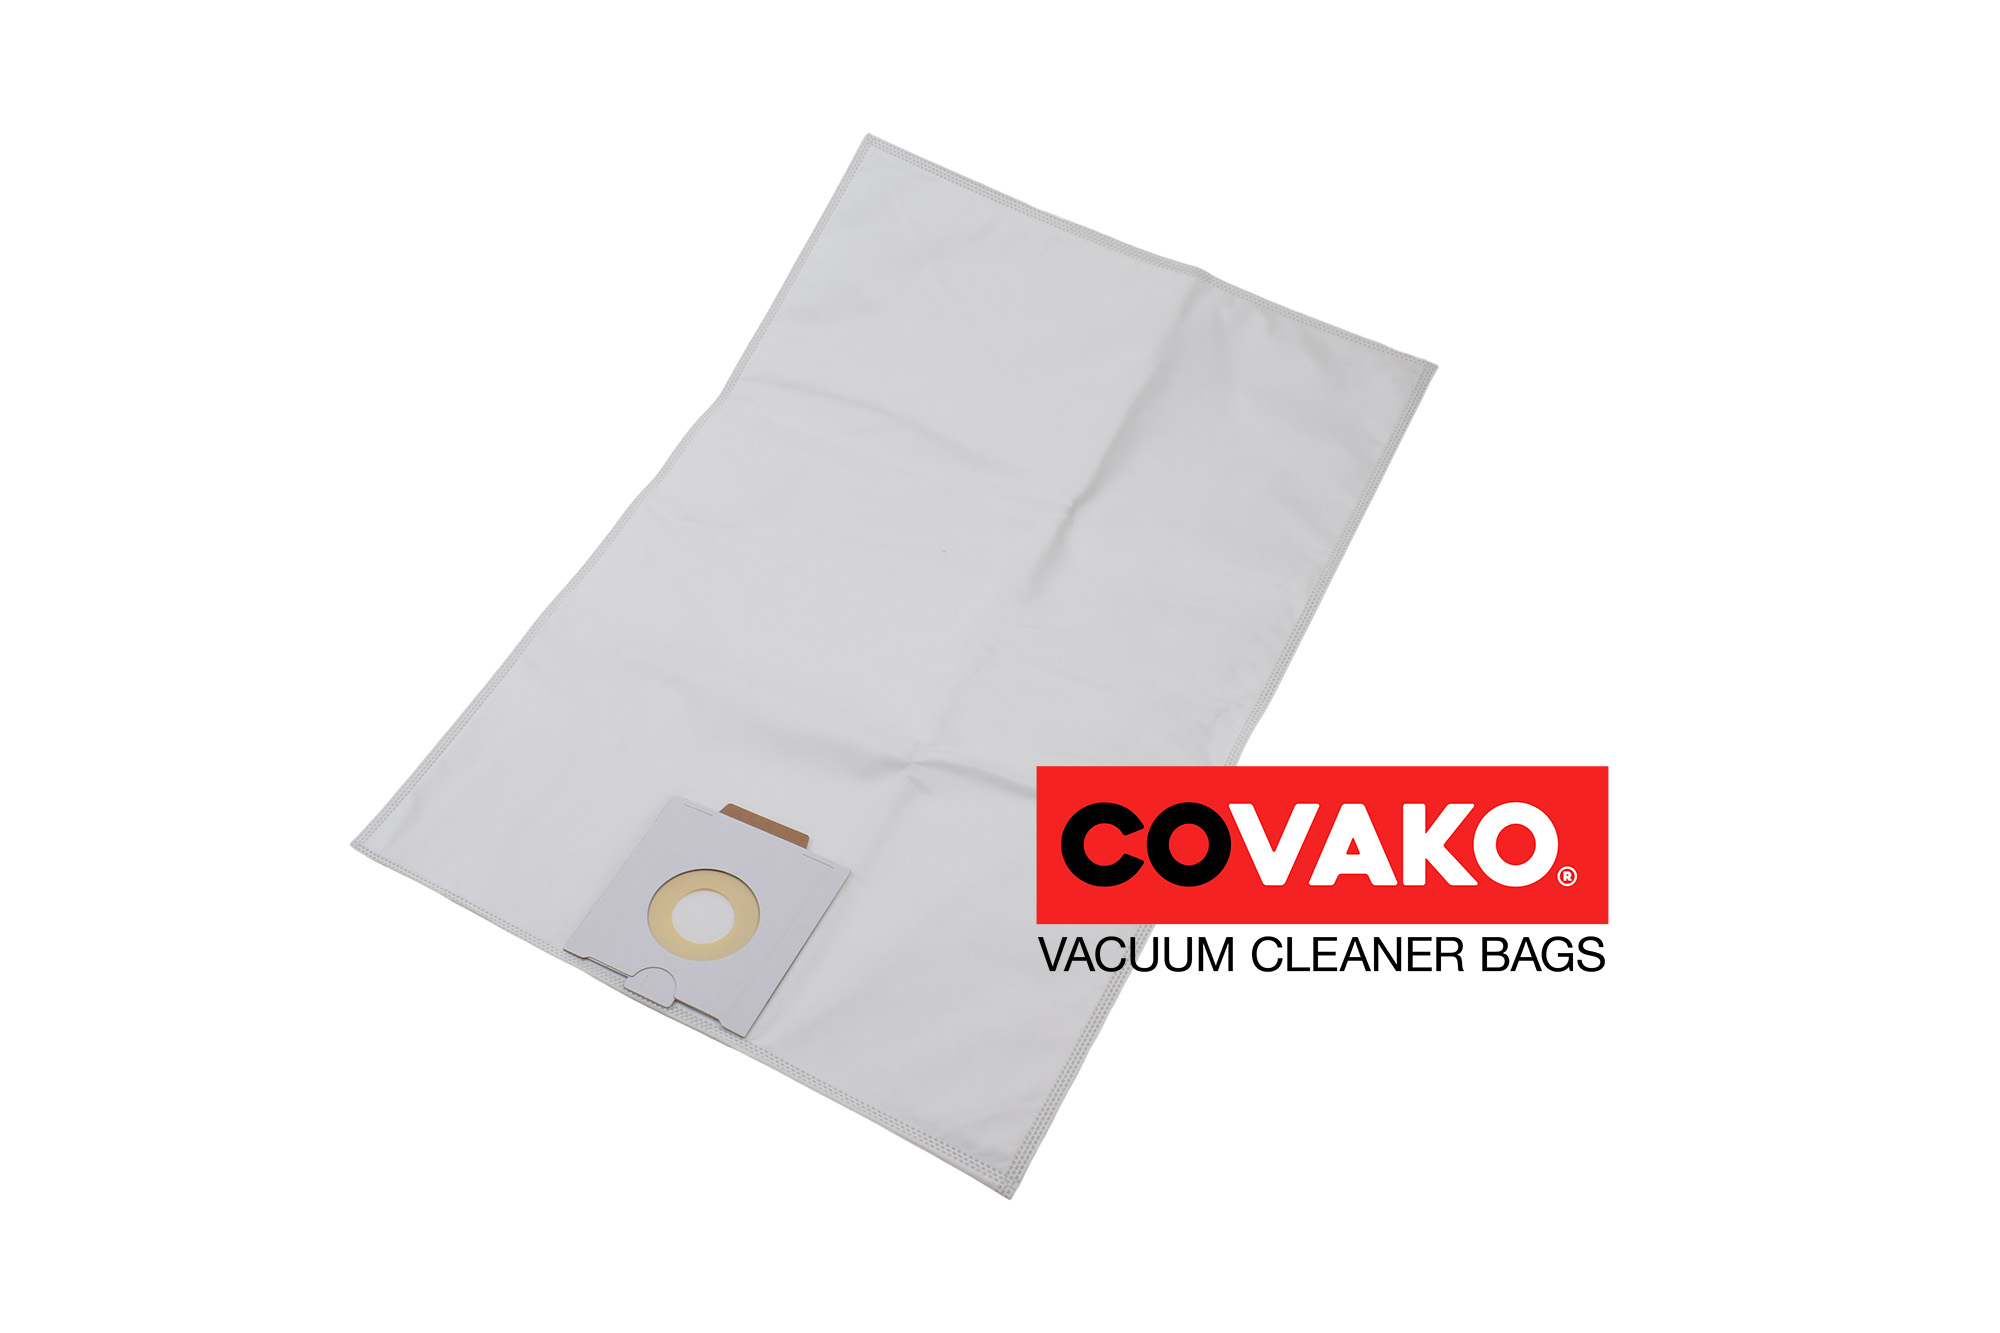 Protool VCP 480 E-M AC / Synthesis - Protool vacuum cleaner bags